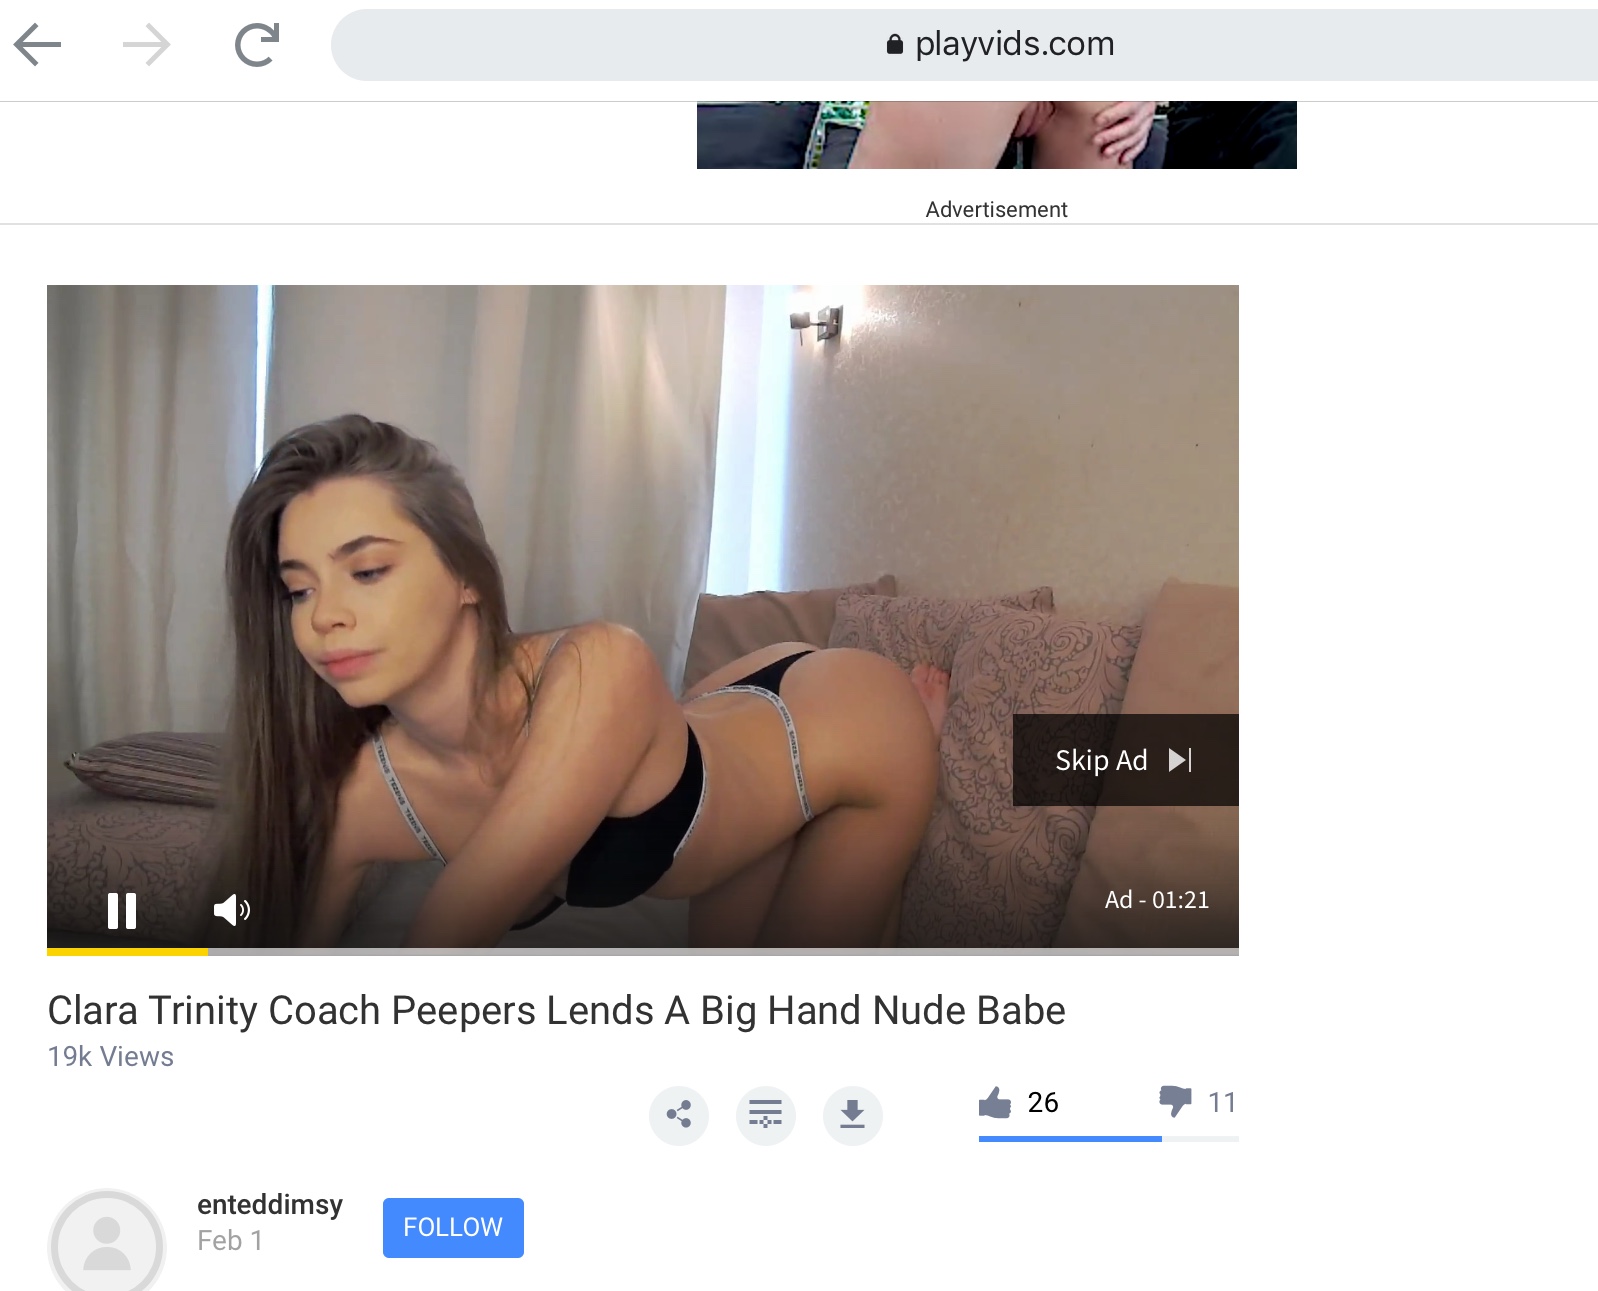 Name of this girl in this porn ad? Please & thank you :) : rtipofmypenis